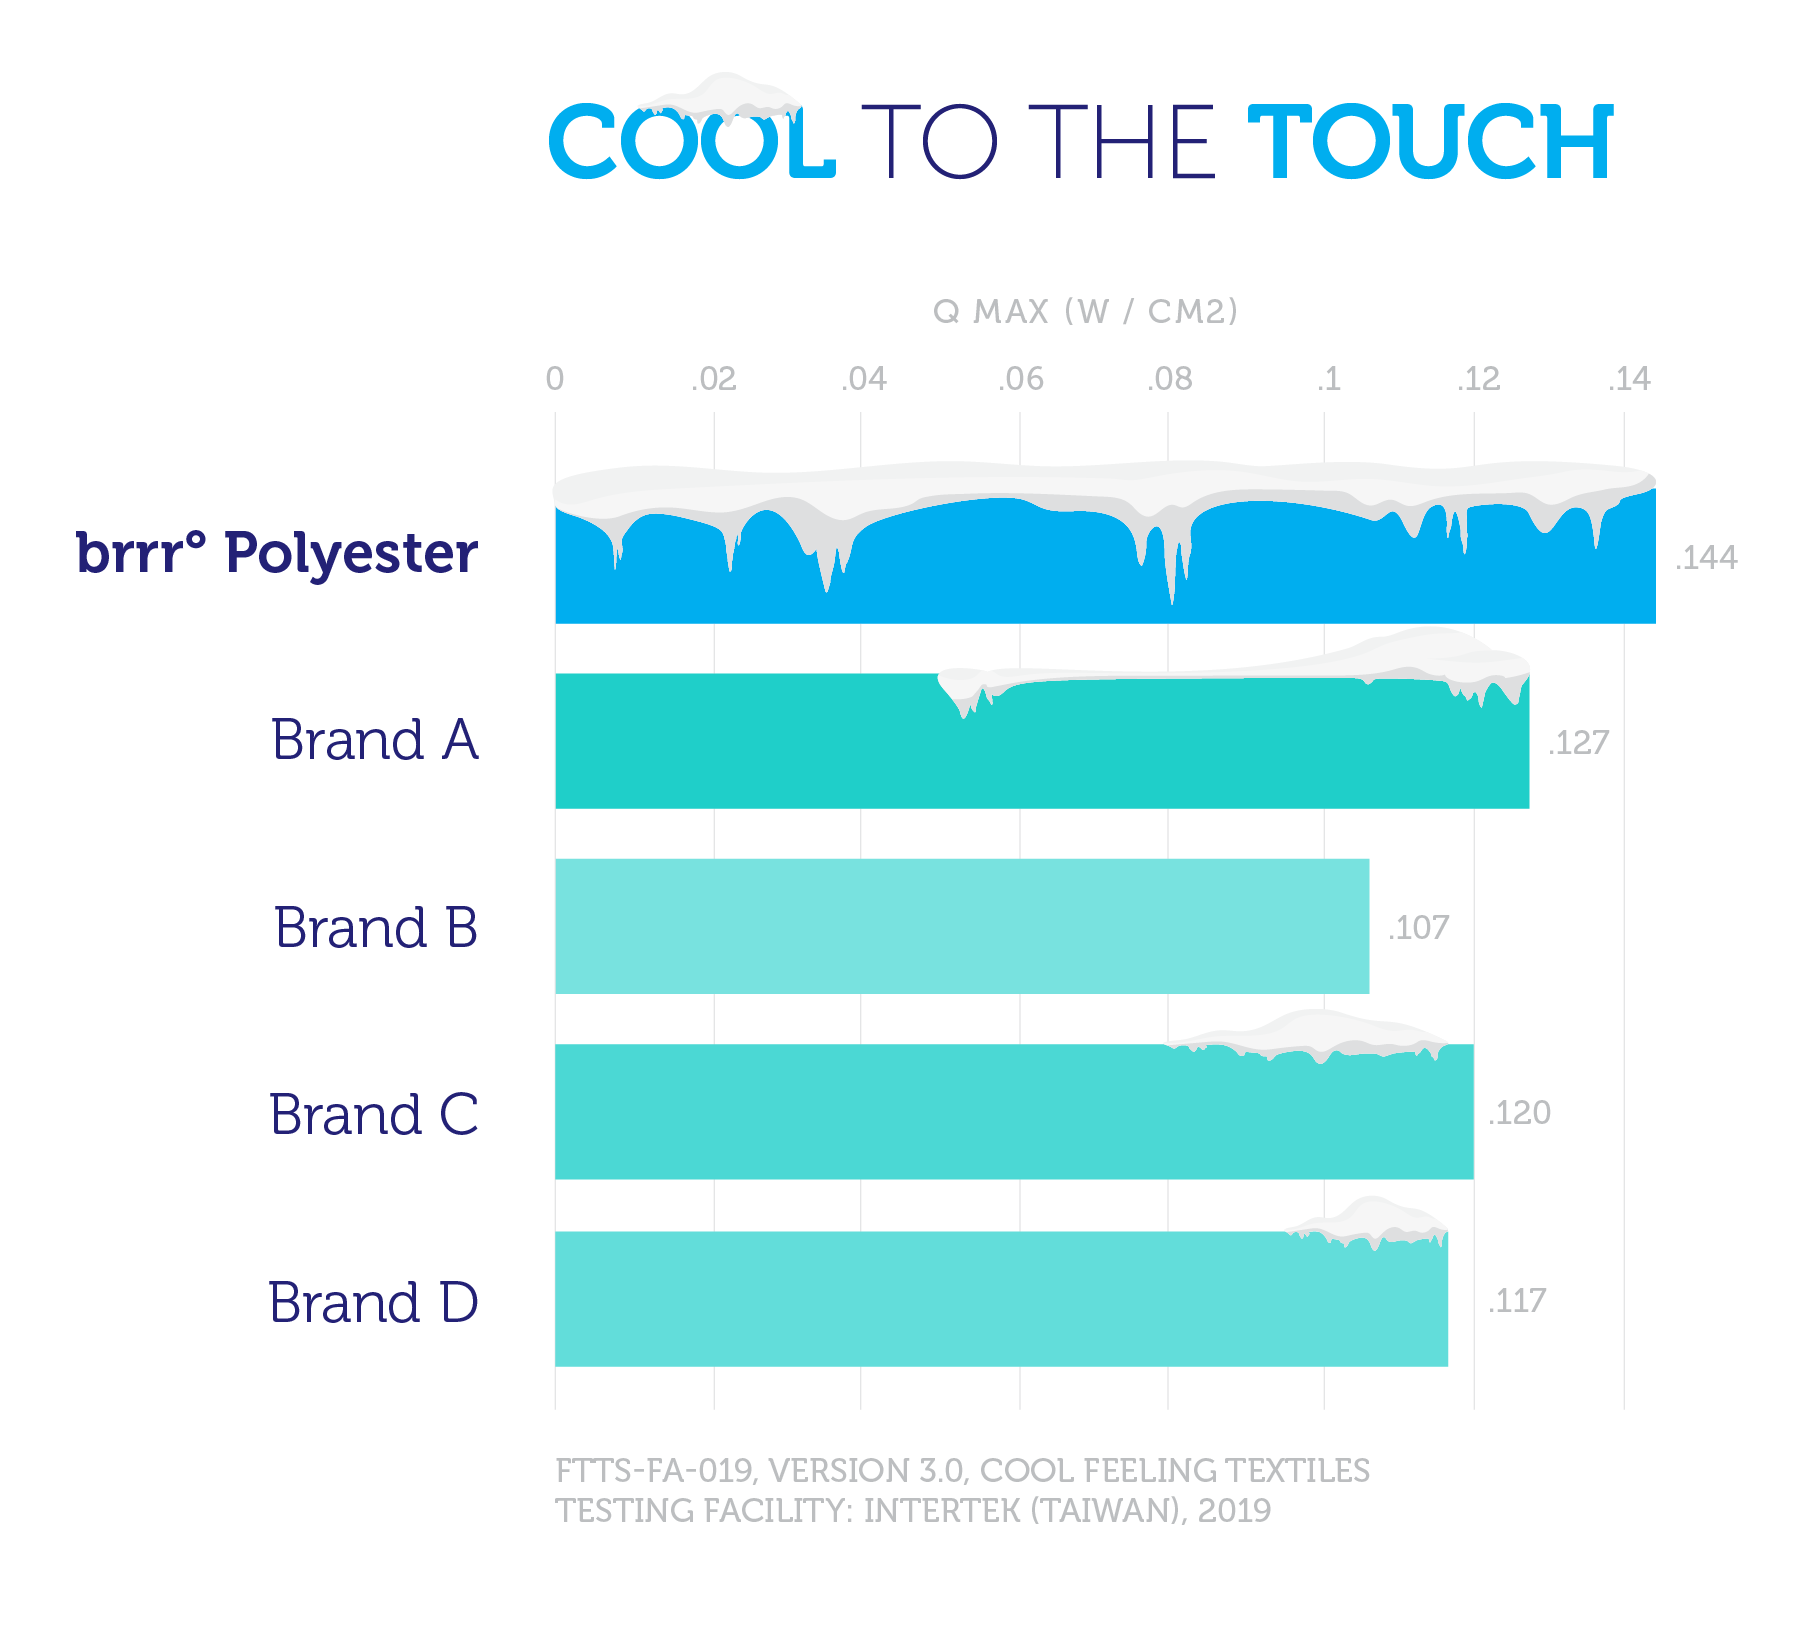 brrr° Polyester Outperforms Competitors in "Cool to the Touch" testing